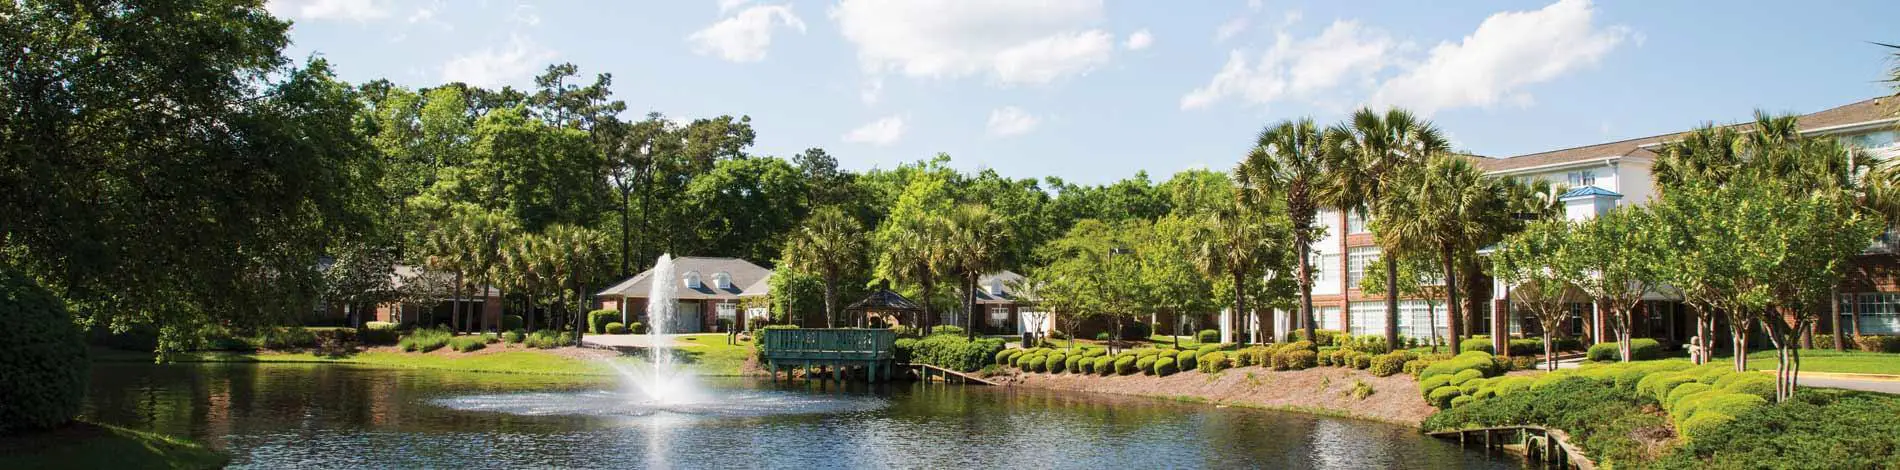 Photo of The Lakes at Litchfield, Assisted Living, Nursing Home, Independent Living, CCRC, Pawleys Island, SC 1